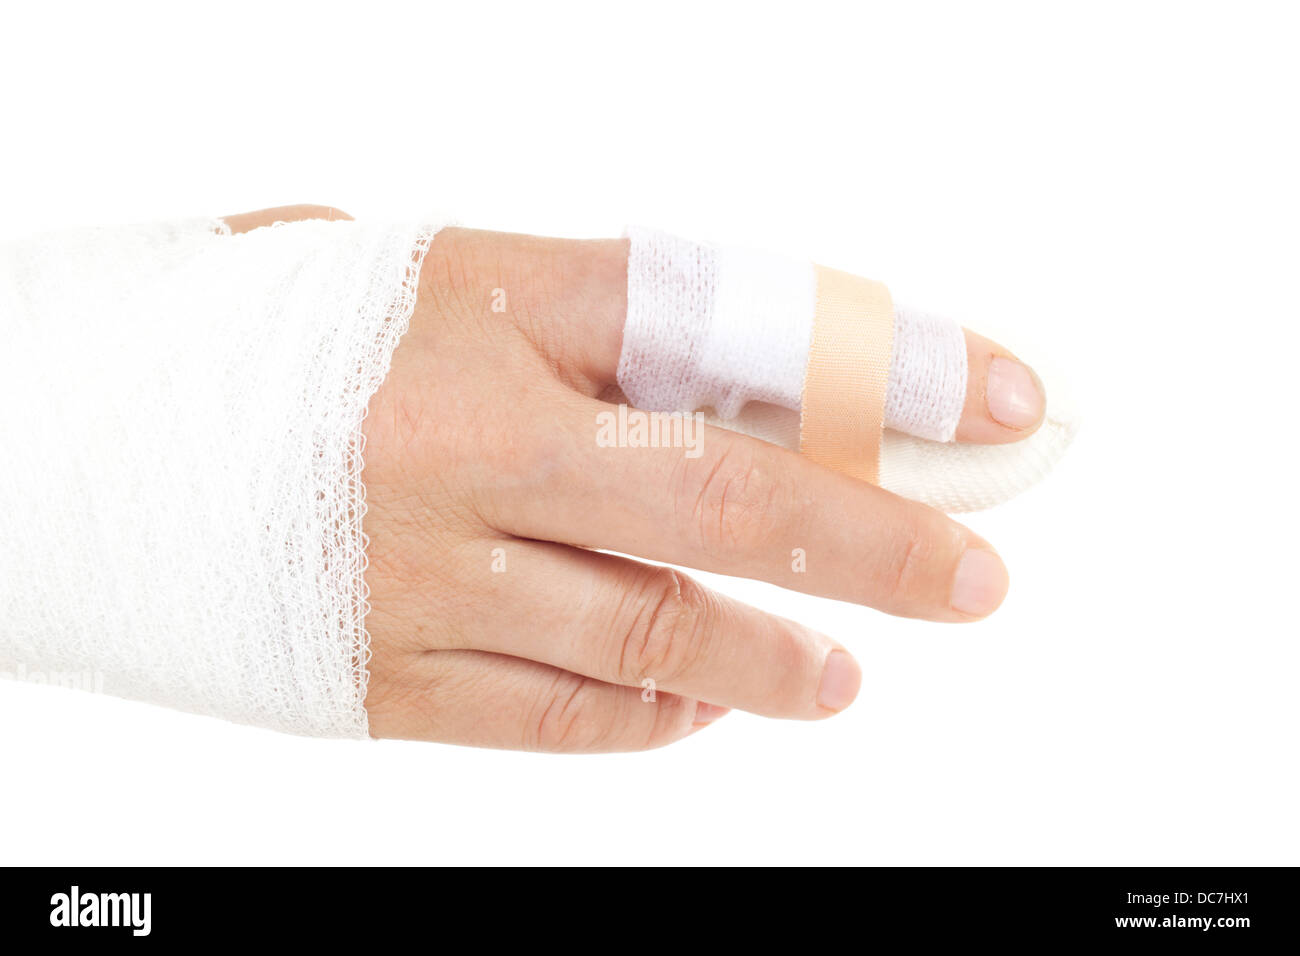 Bandaged hand to prevent infection and improve healing Stock Photo